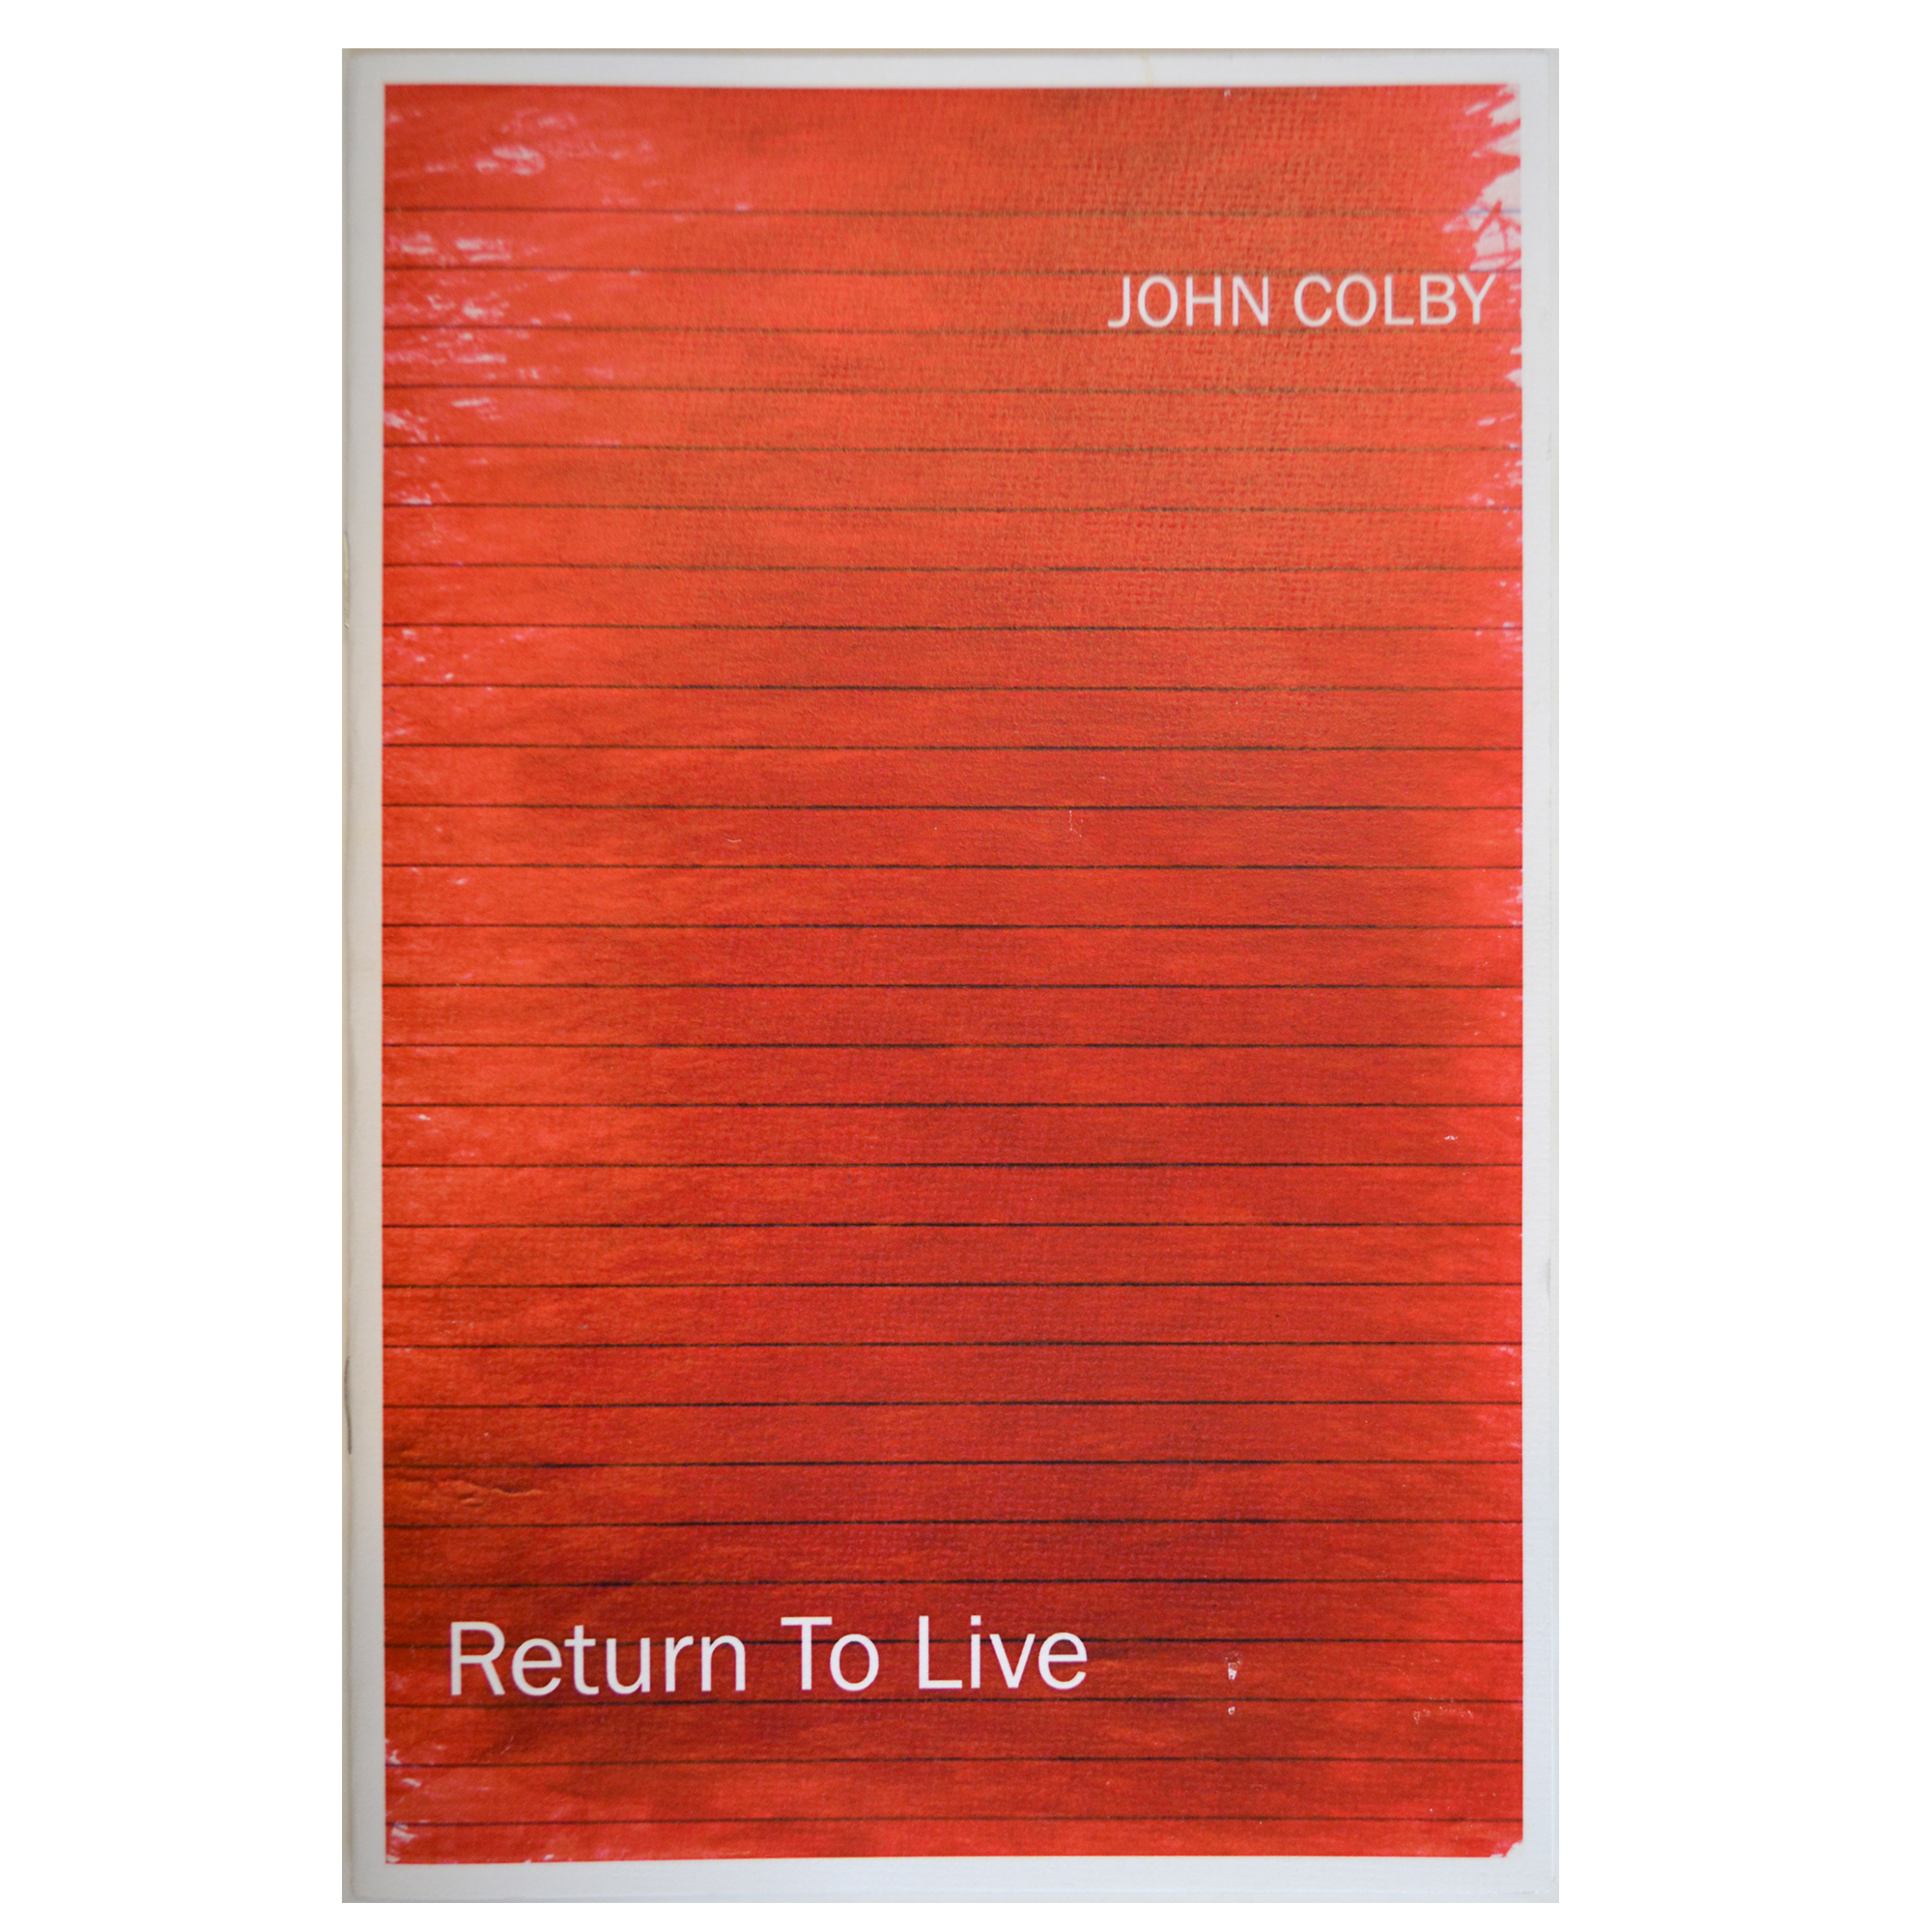 Return to Live by John Colby